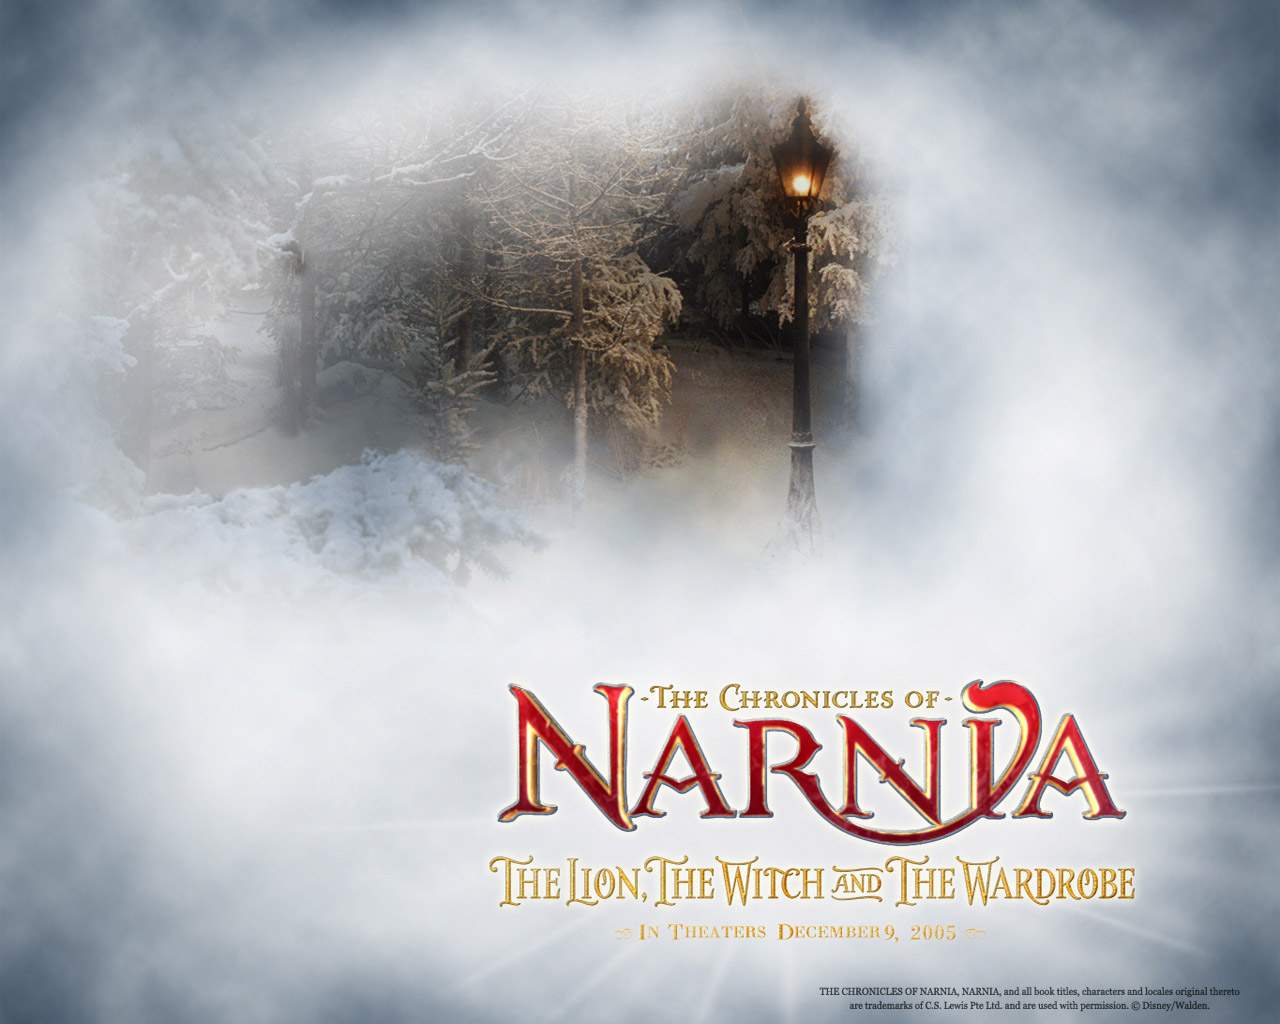 The Chronicles Of Narnia: The Lion, The Witch And The Wardrobe wallpaper, Movie, HQ The Chronicles Of Narnia: The Lion, The Witch And The Wardrobe pictureK Wallpaper 2019